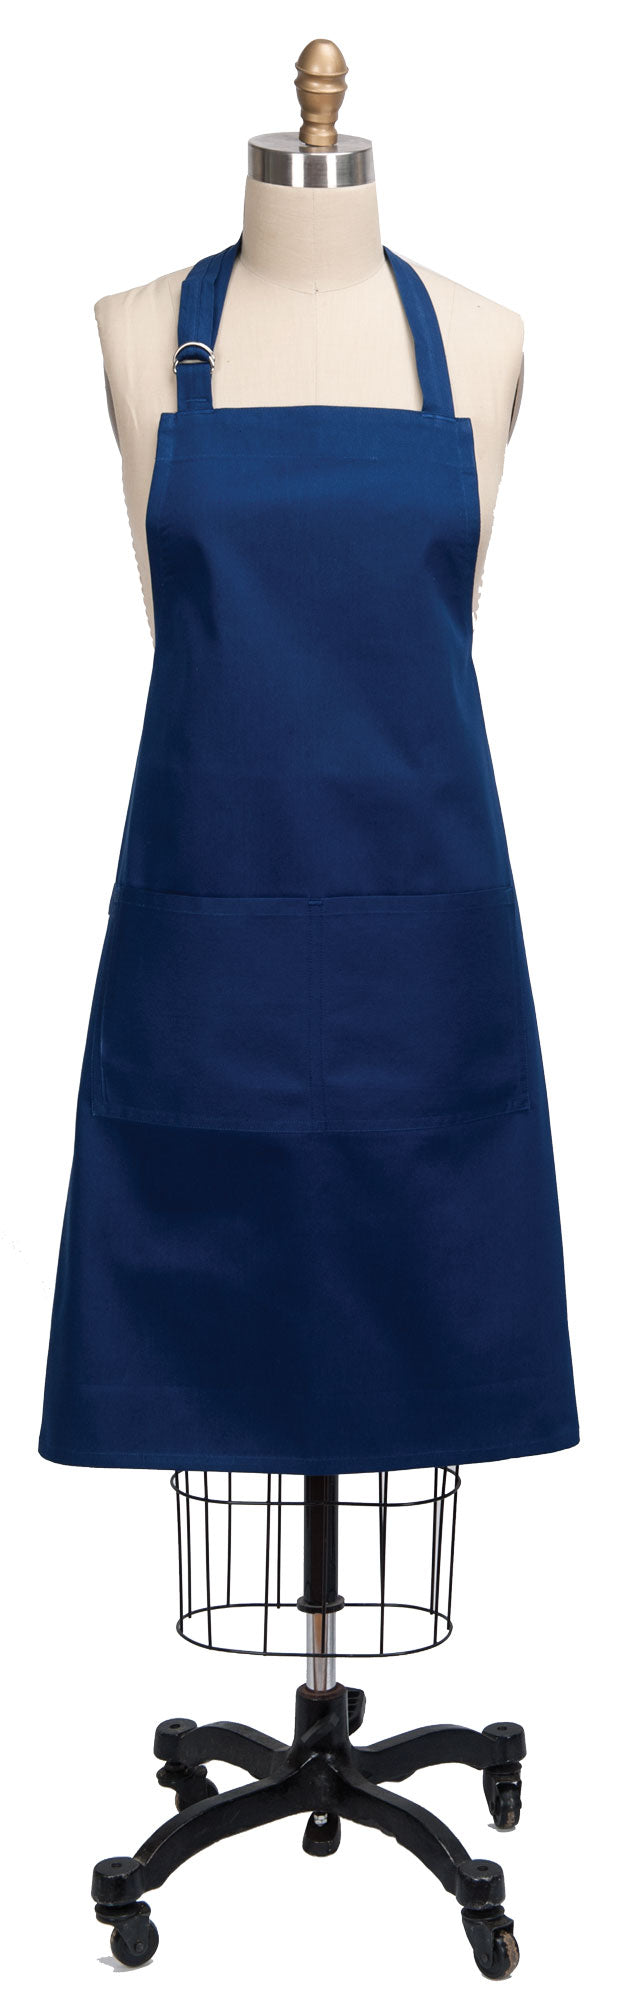 Twilight Blue Solid Chef Apron - The Country Christmas Loft